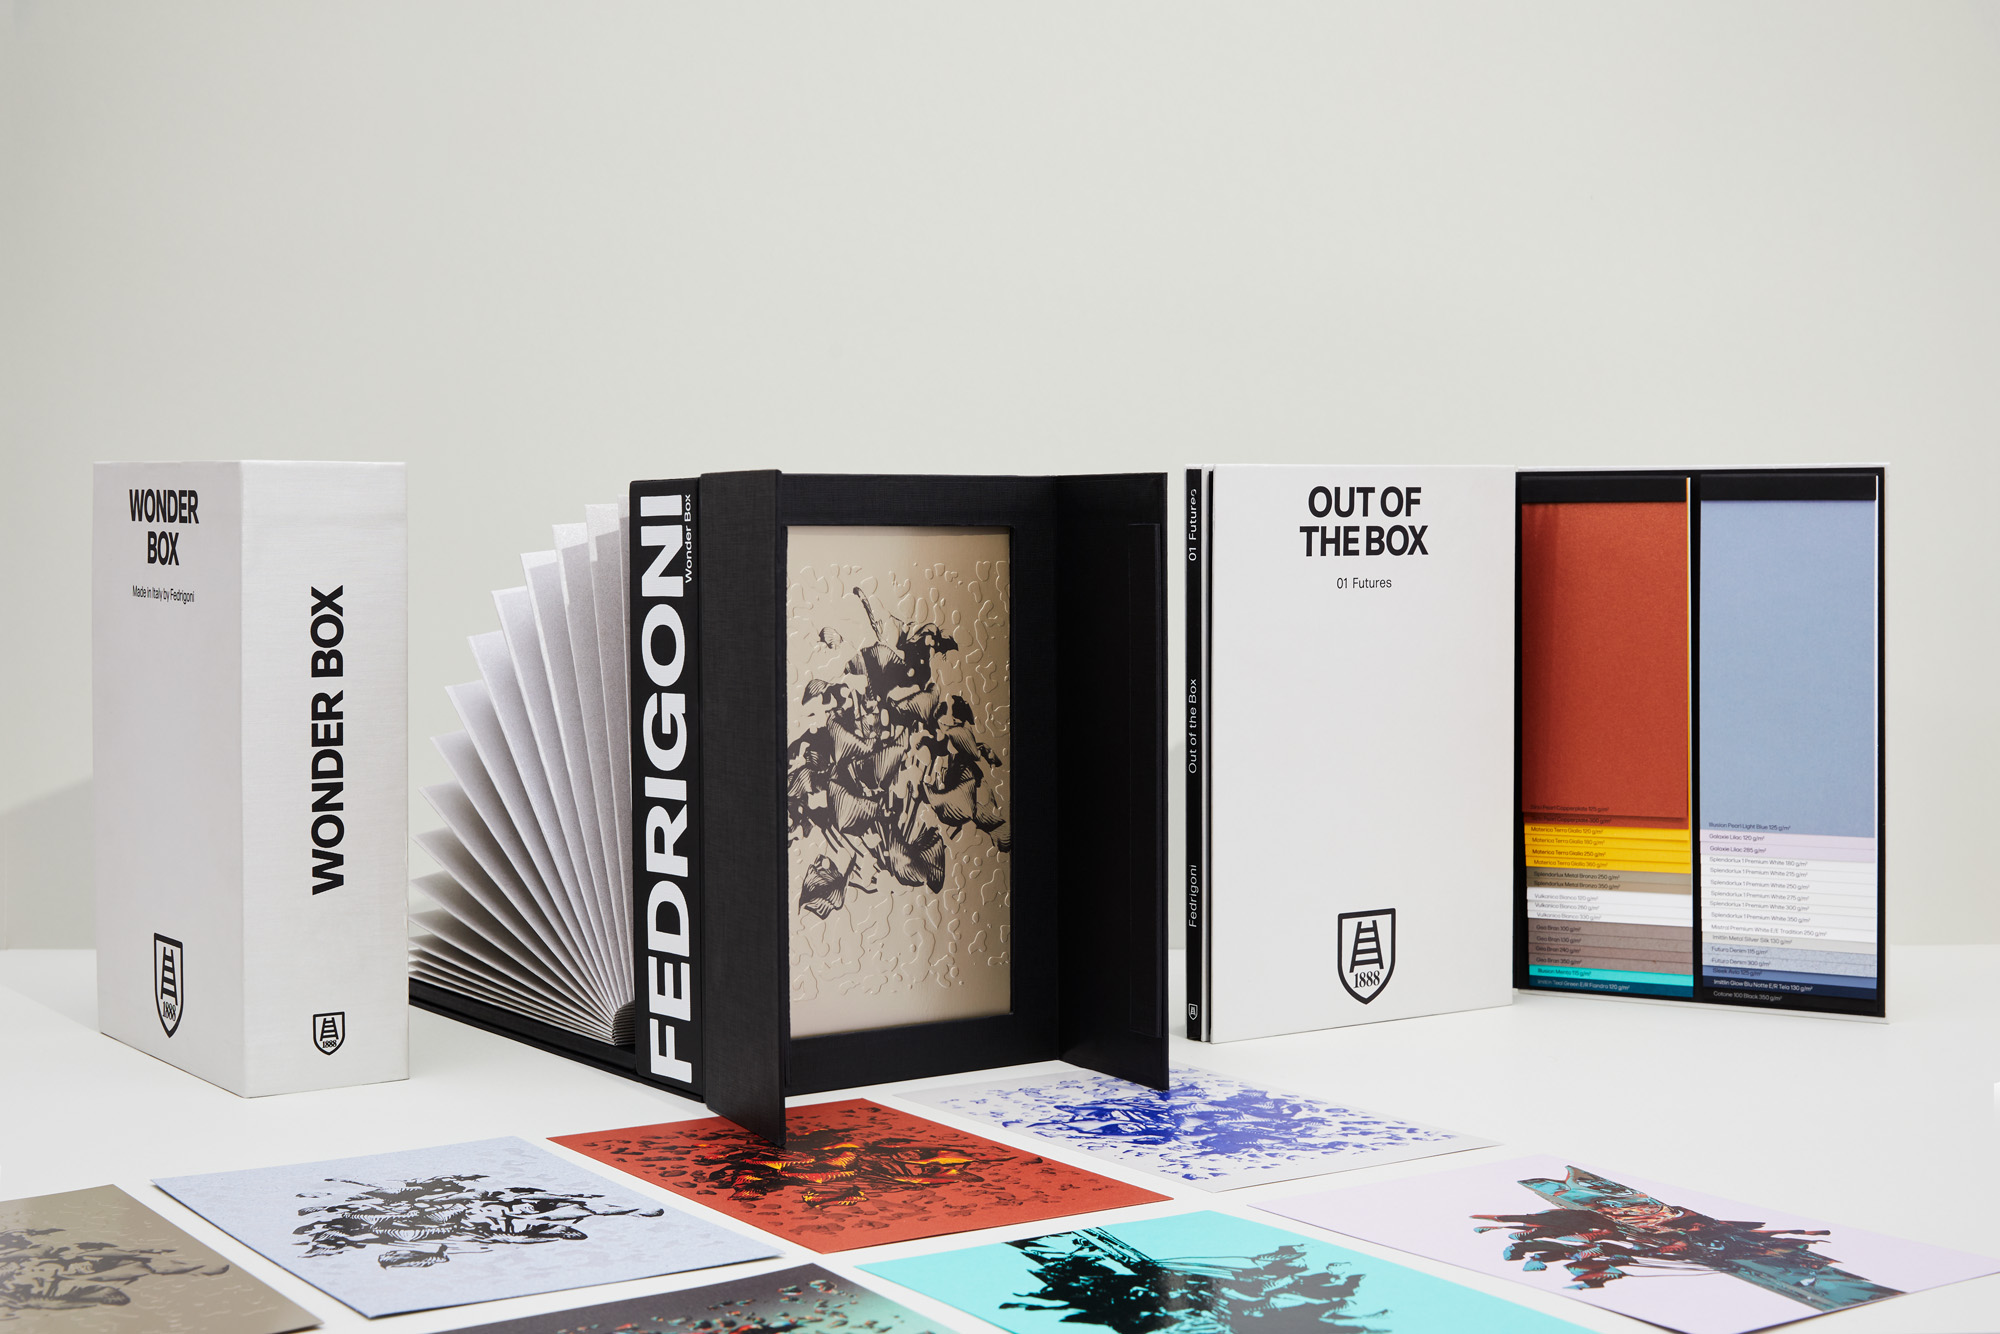 Discover Futures, a collection of papers featured in Out of the Box and Wonder Box